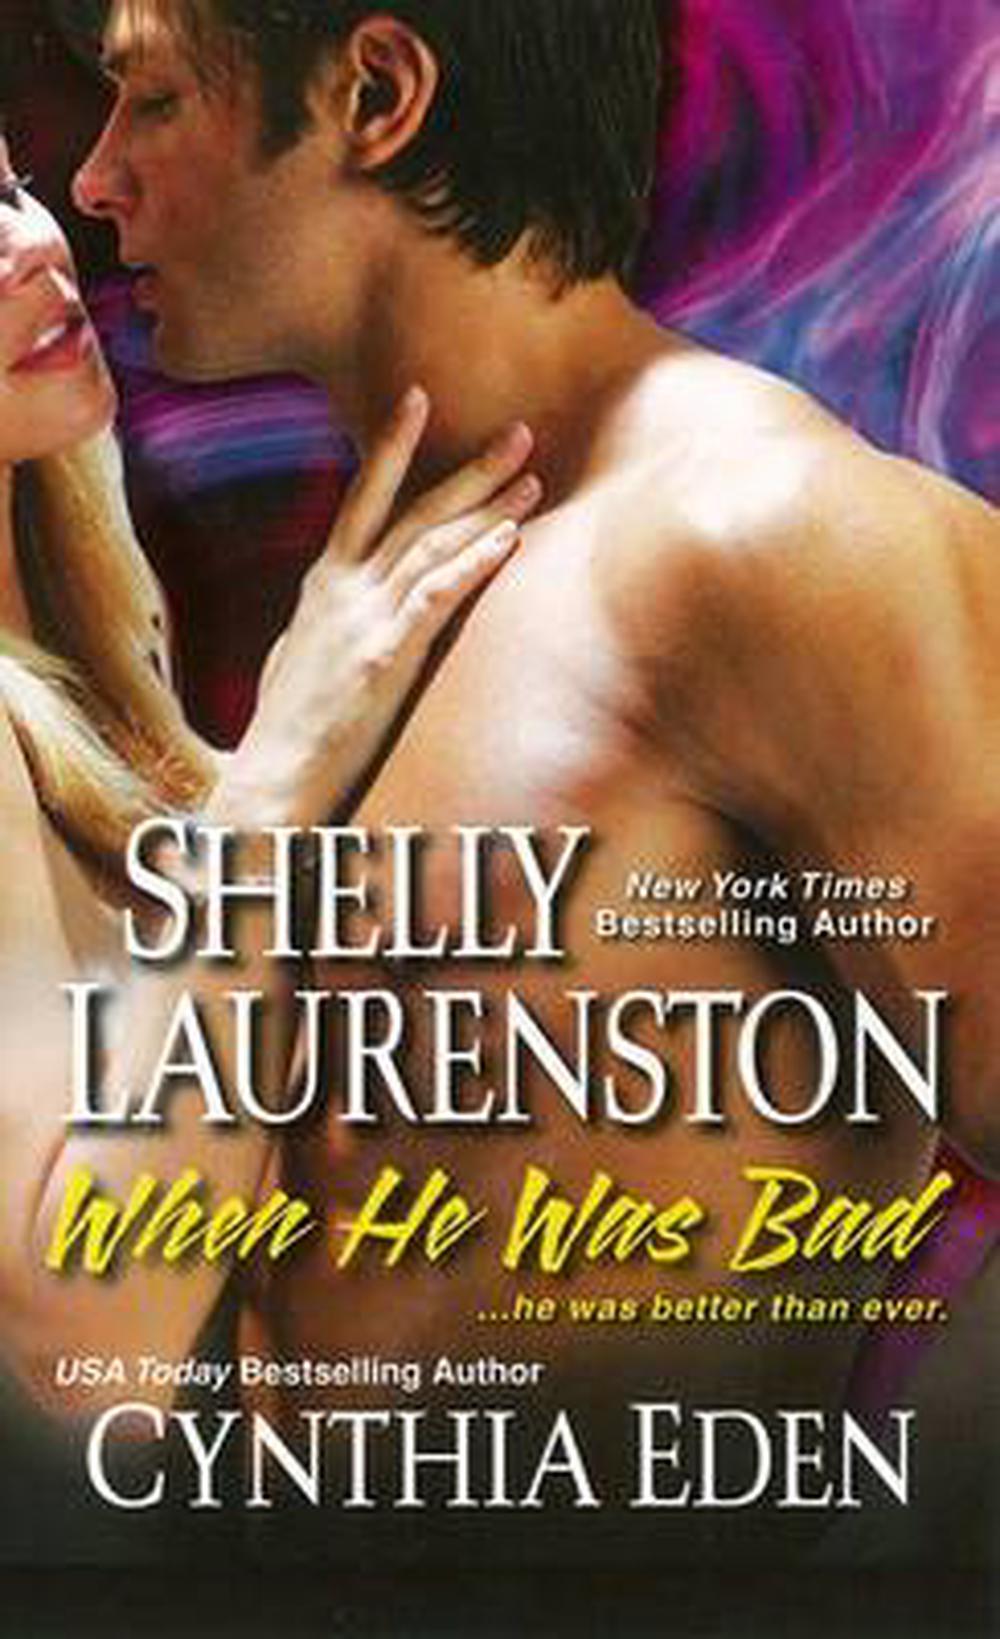 Howl For It by Shelly Laurenston